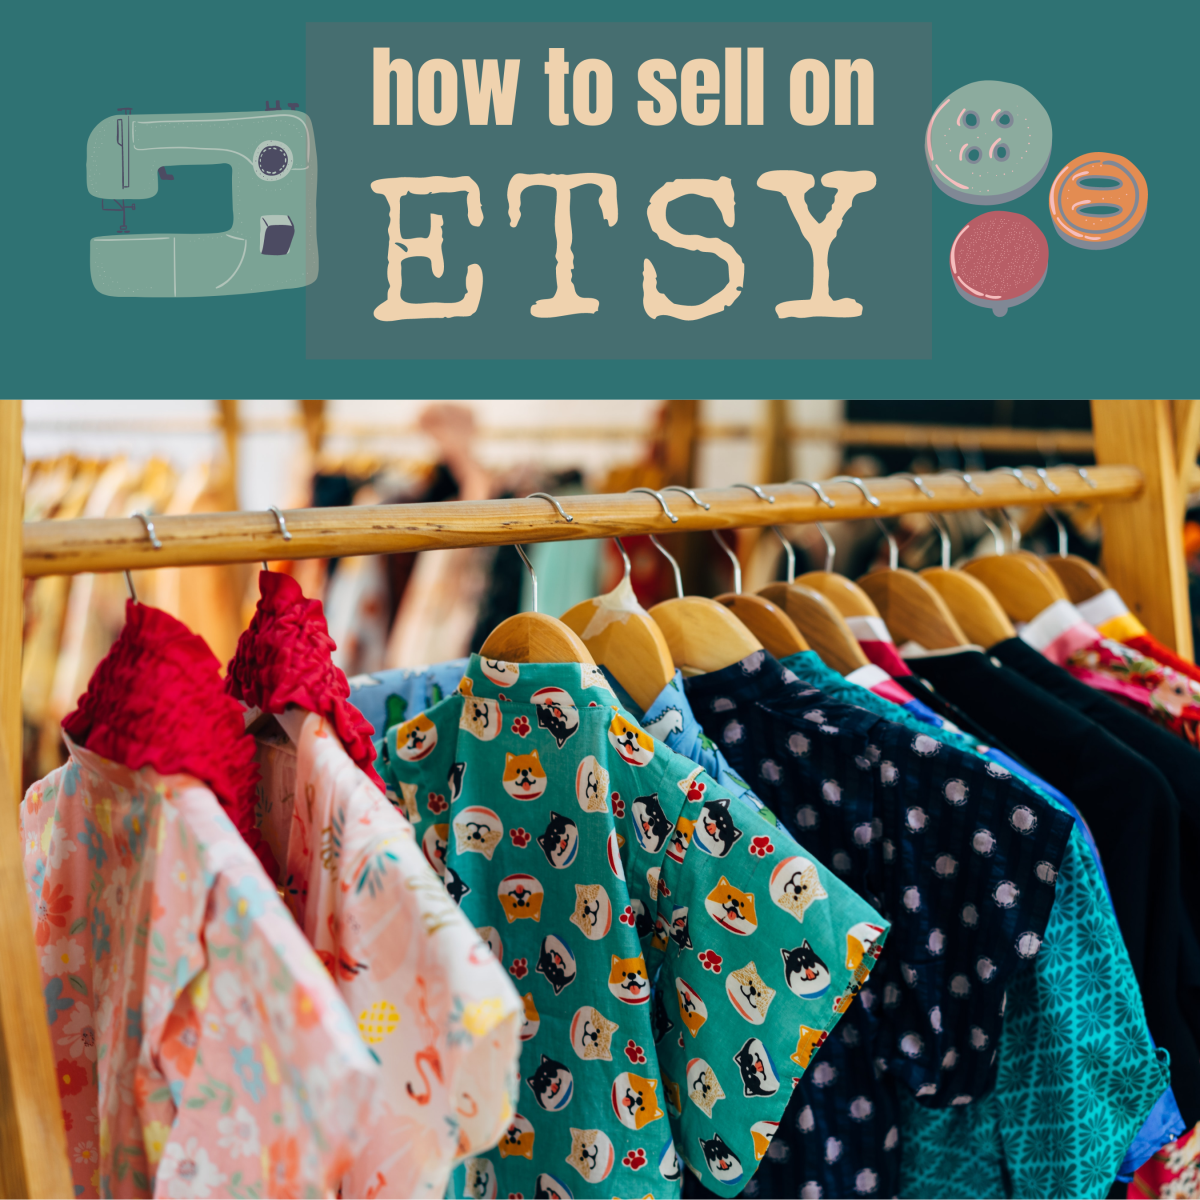 How to sell successfully on Etsy.